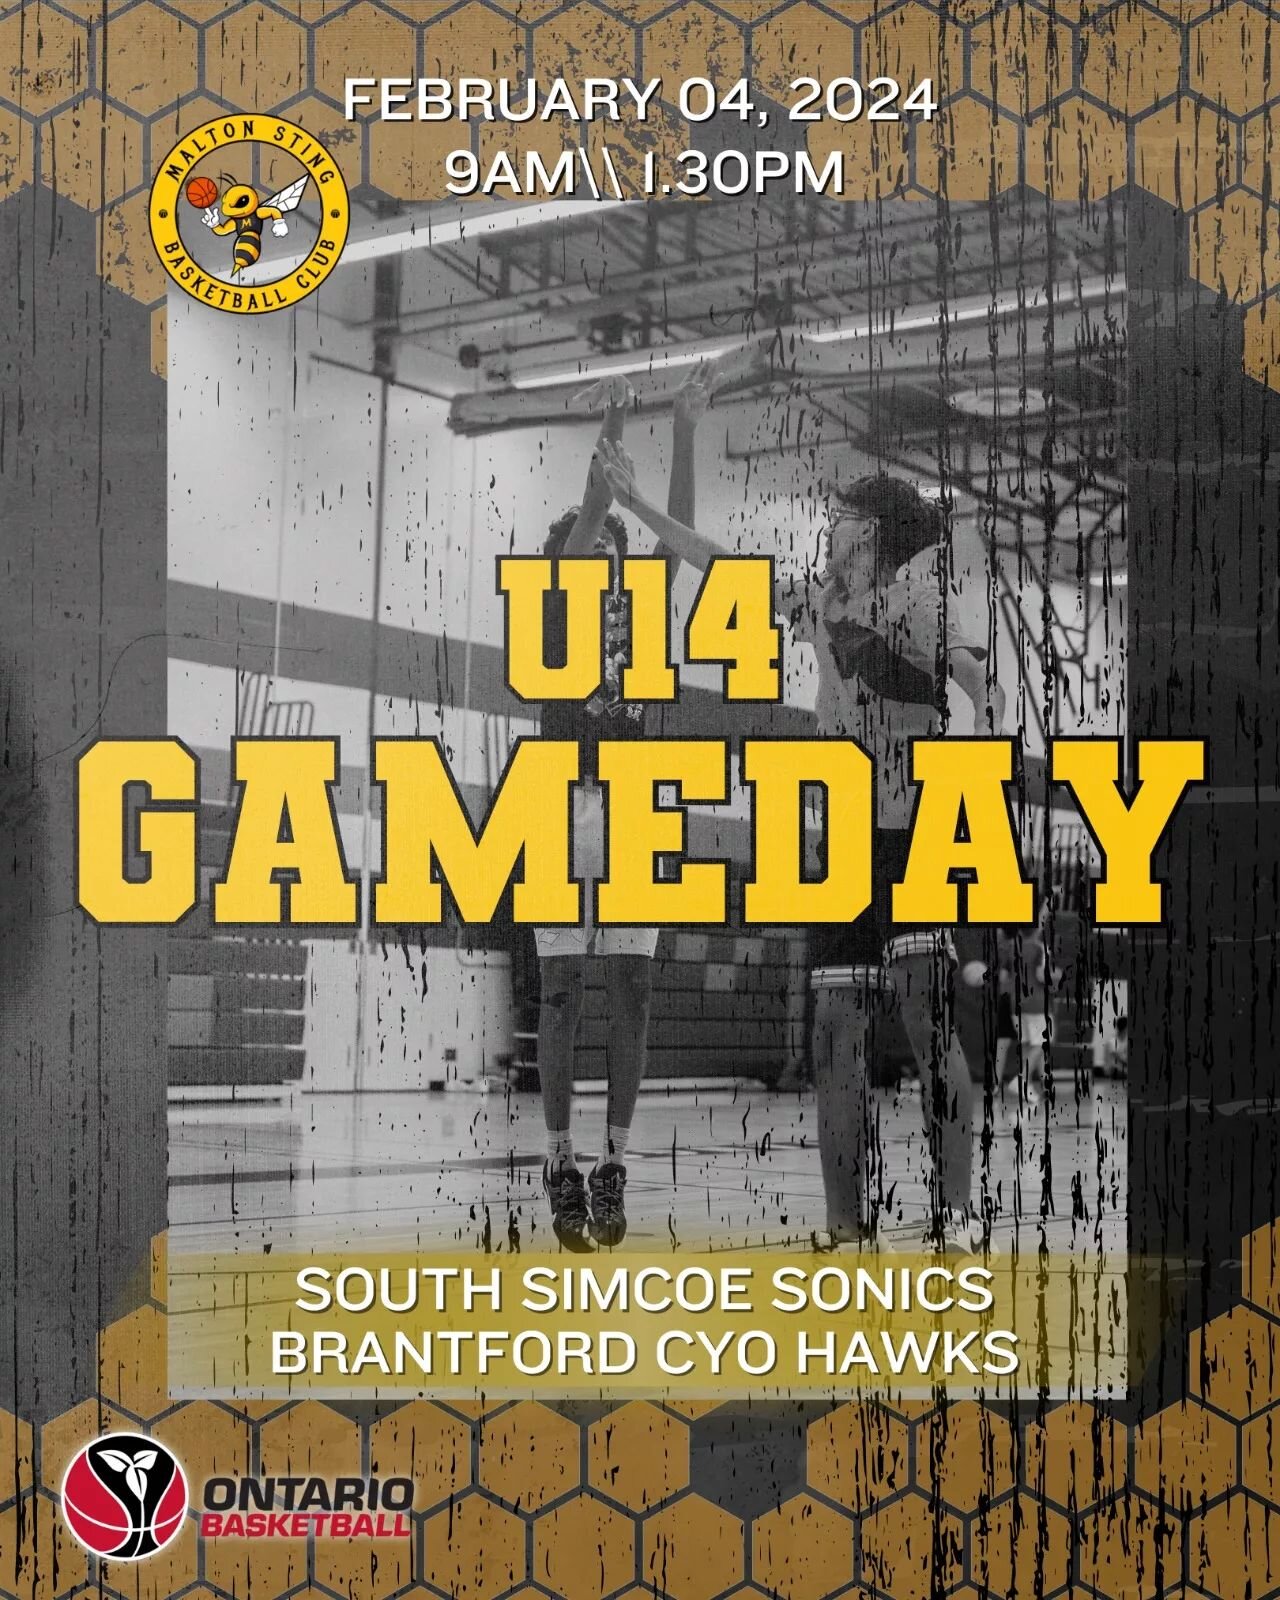 Gameday for our U14s 🔥🐝